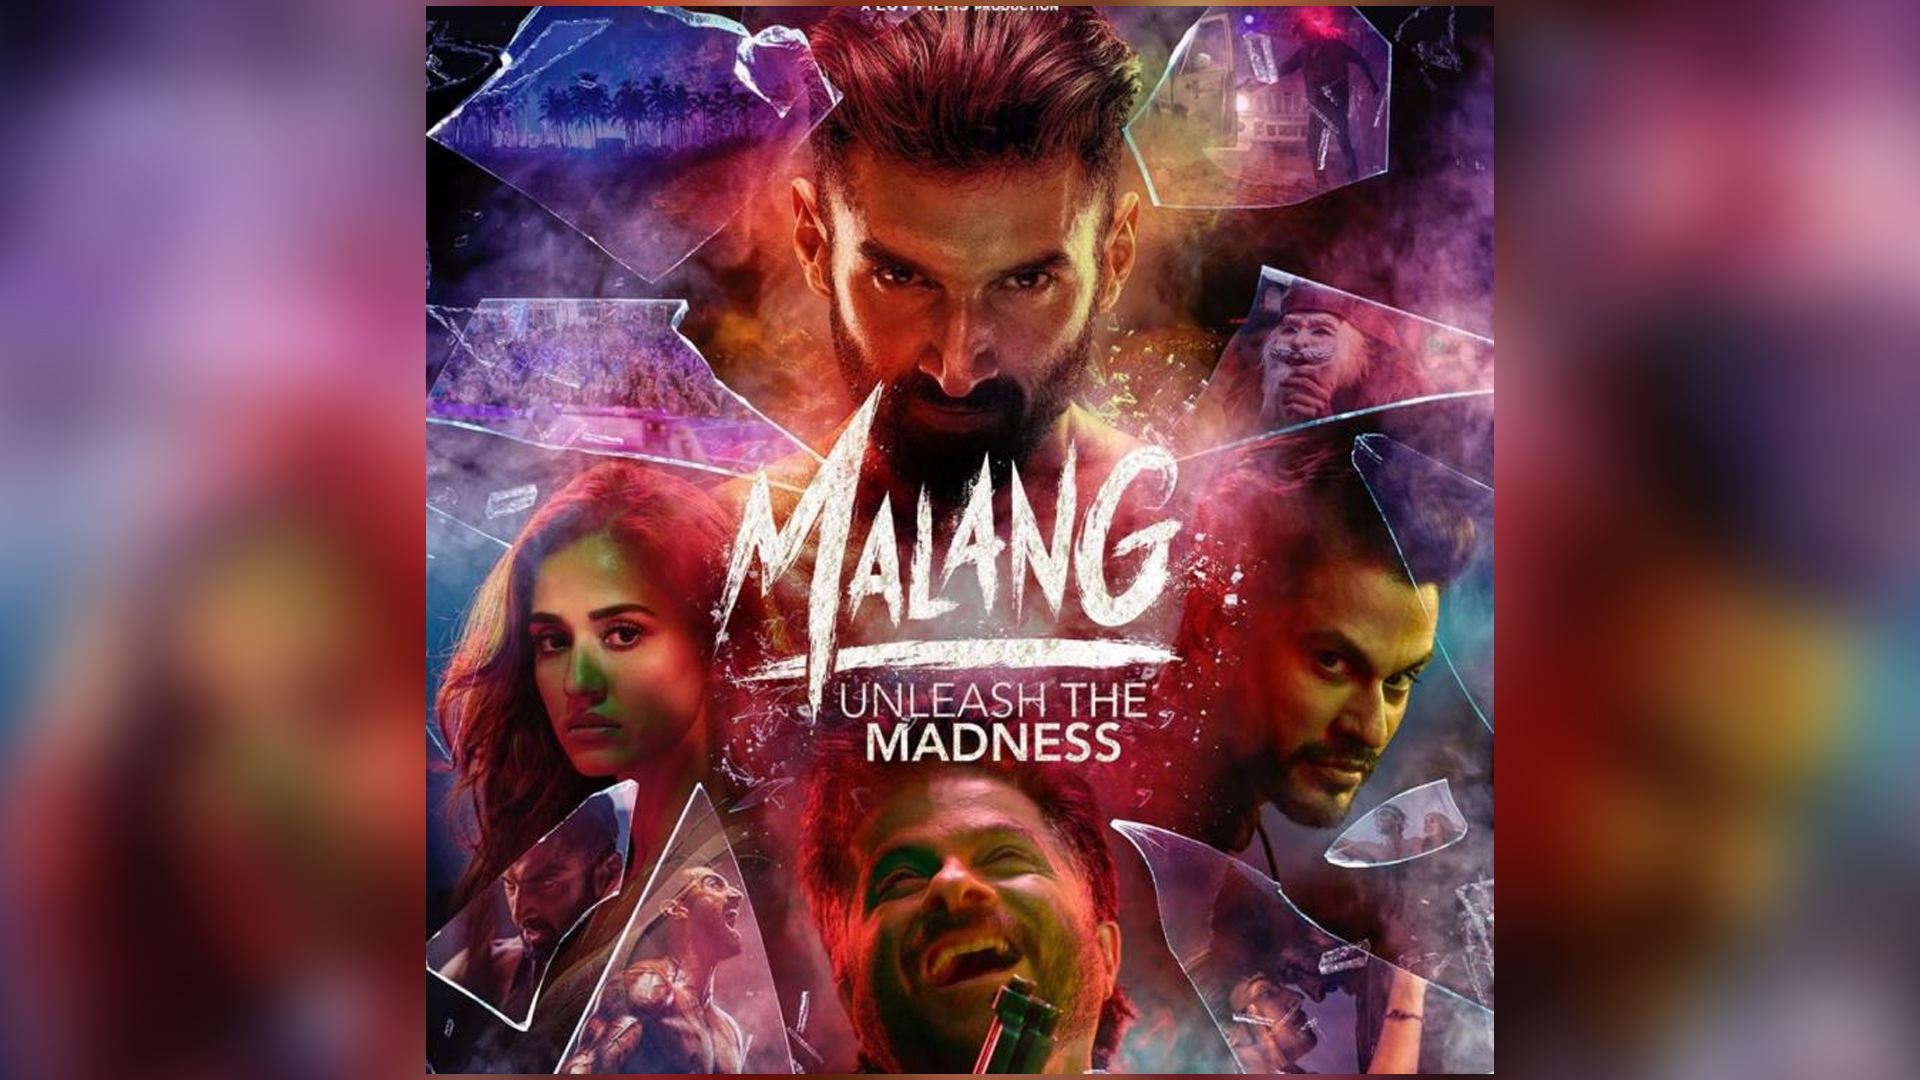 Malang becomes the 3rd film of 2020 to cross 50 crore mark and charted 56.46 crores on Box Office